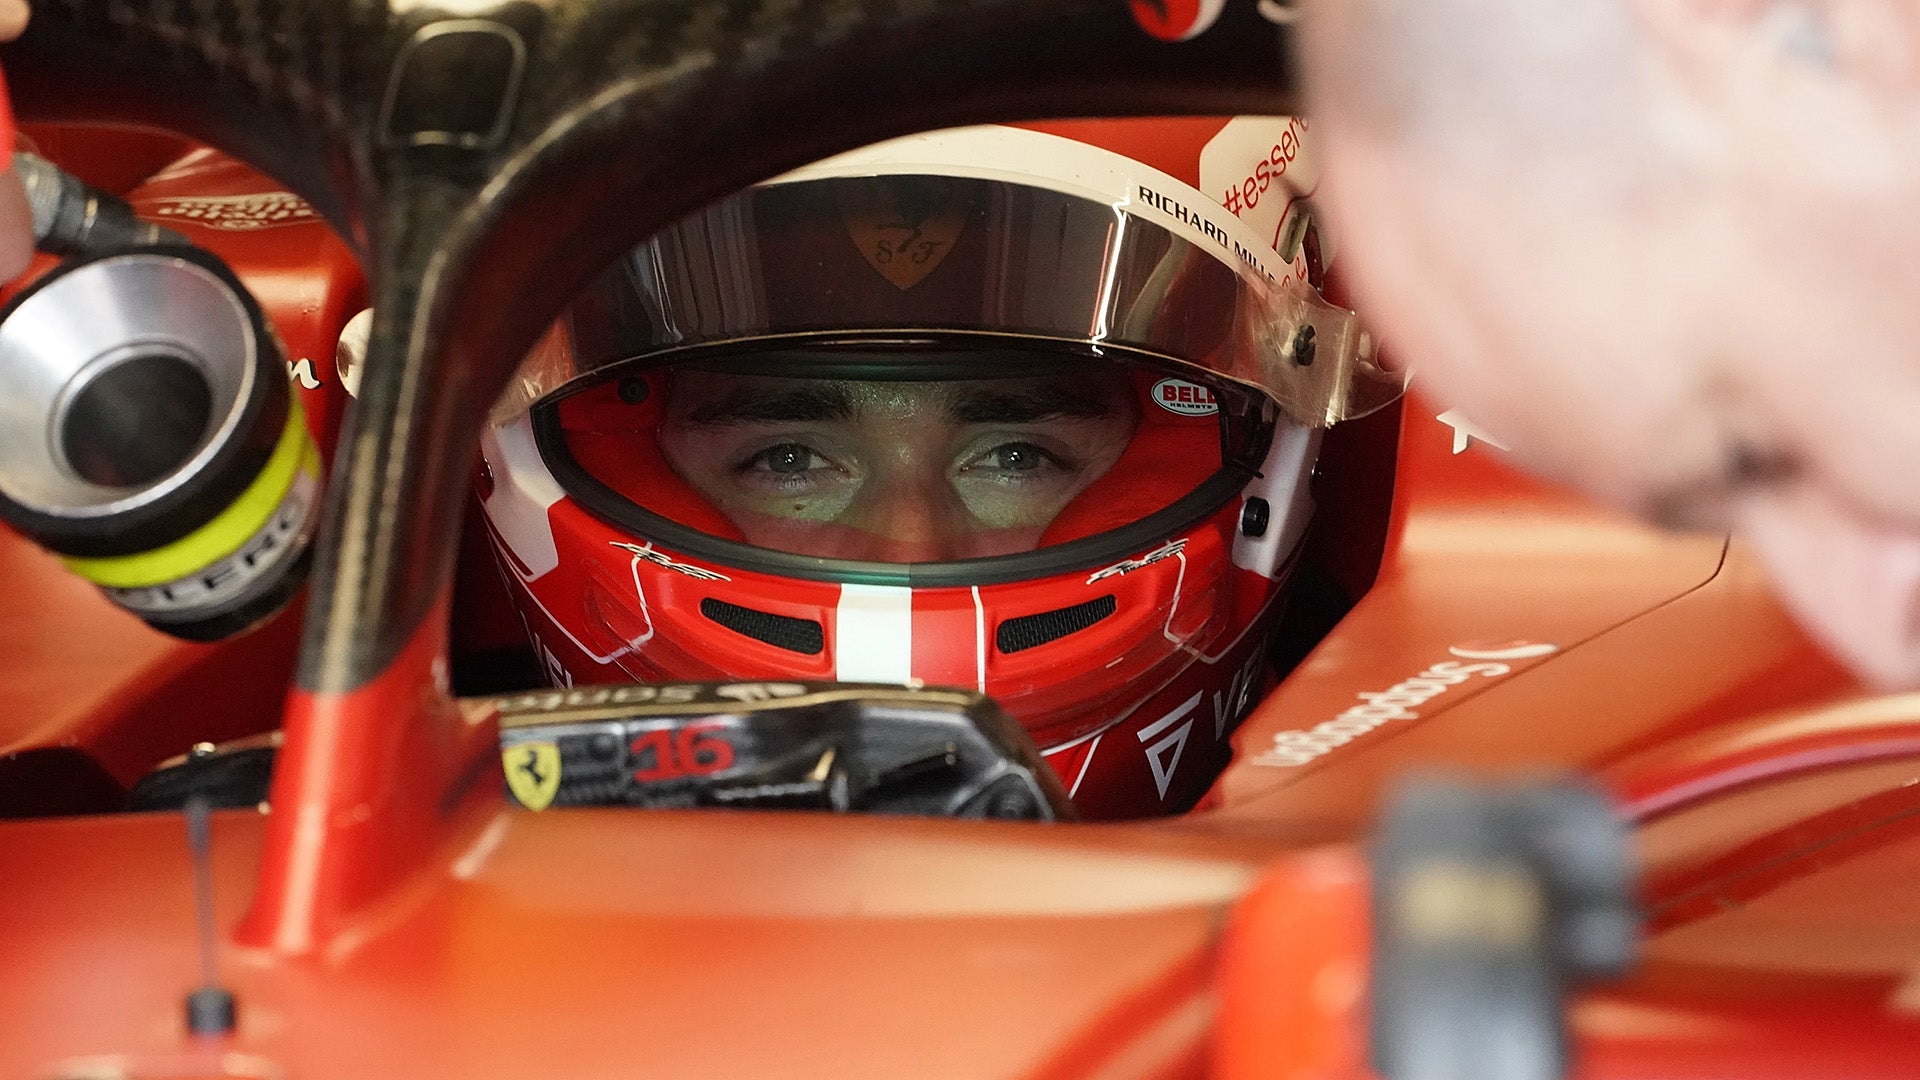 07 May 2022, US, Miami: Motorsport: Formula 1 World Championship, Miami Grand Prix, 3rd Free Practice: Charles Leclerc from Monaco of Team Ferrari in the pits. Photo: Hasan Bratic/dpa (Photo by Hasan Bratic/picture alliance via Getty Images)